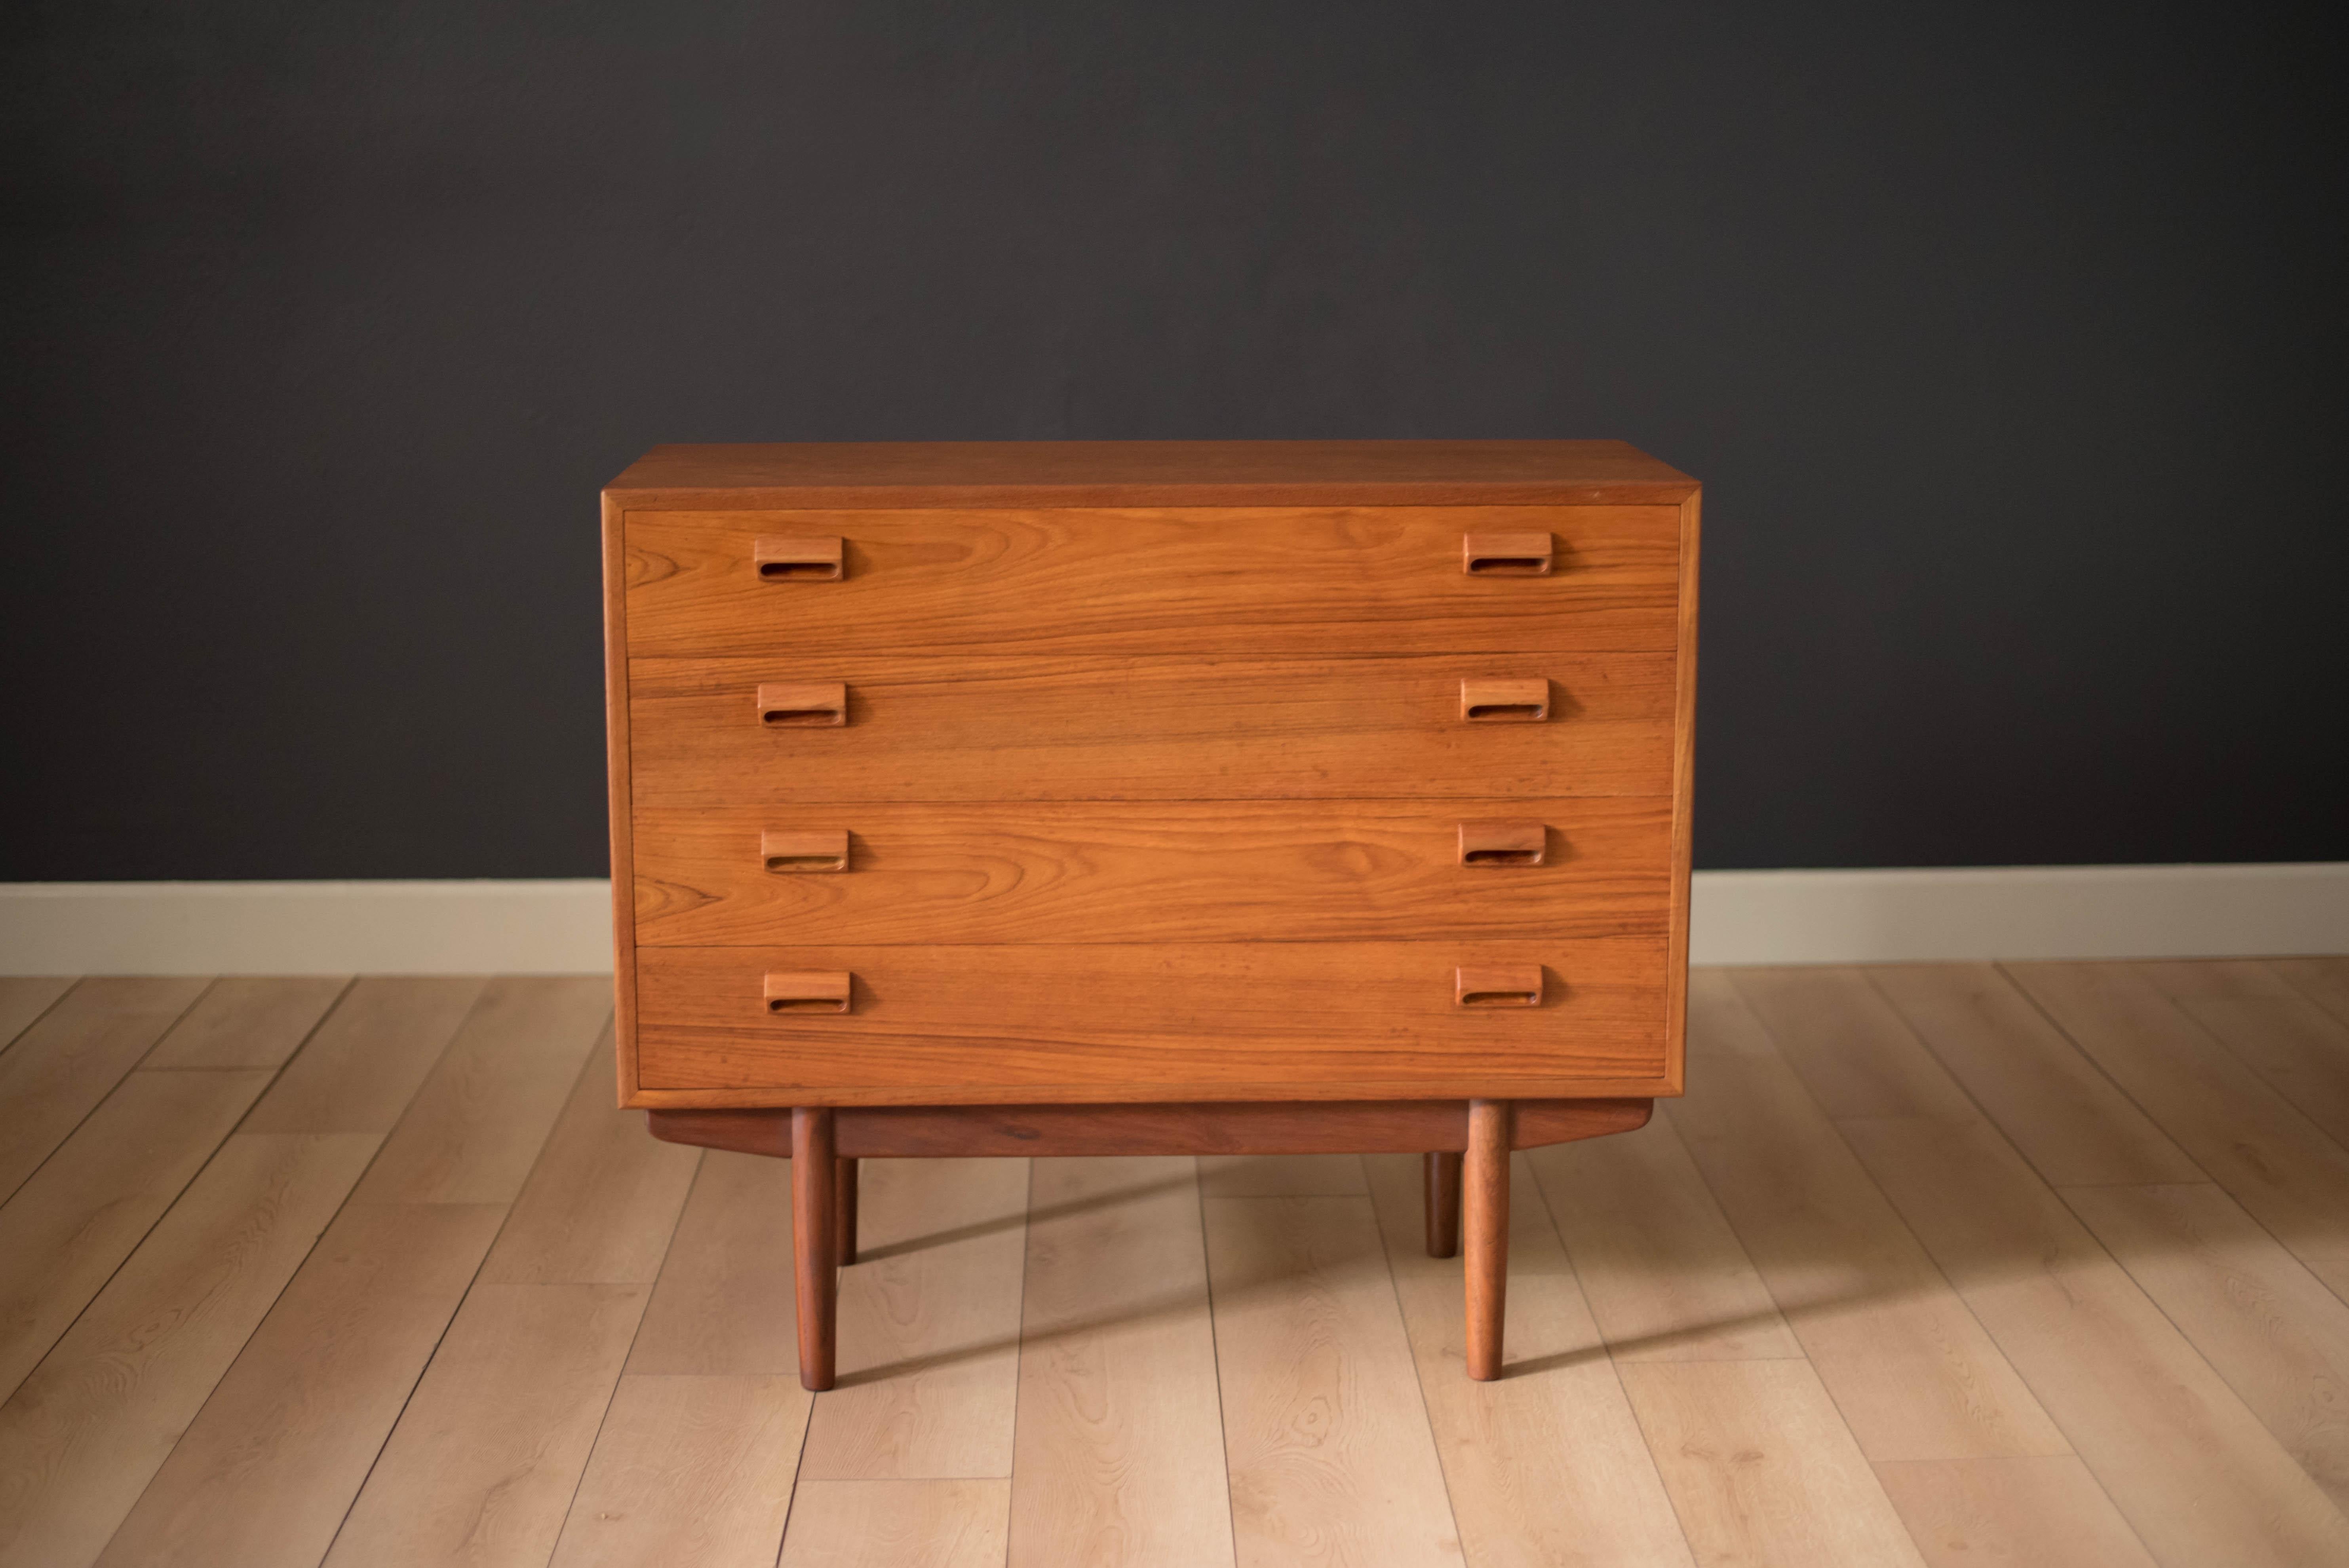 Mid-Century Modern dresser chest by Børge Mogensen for Søborg Møbelfabrik. This piece displays a flowing teak grain pattern and includes four dovetailed drawers accented with the designer's signature sculpted handles. Base is also finished in